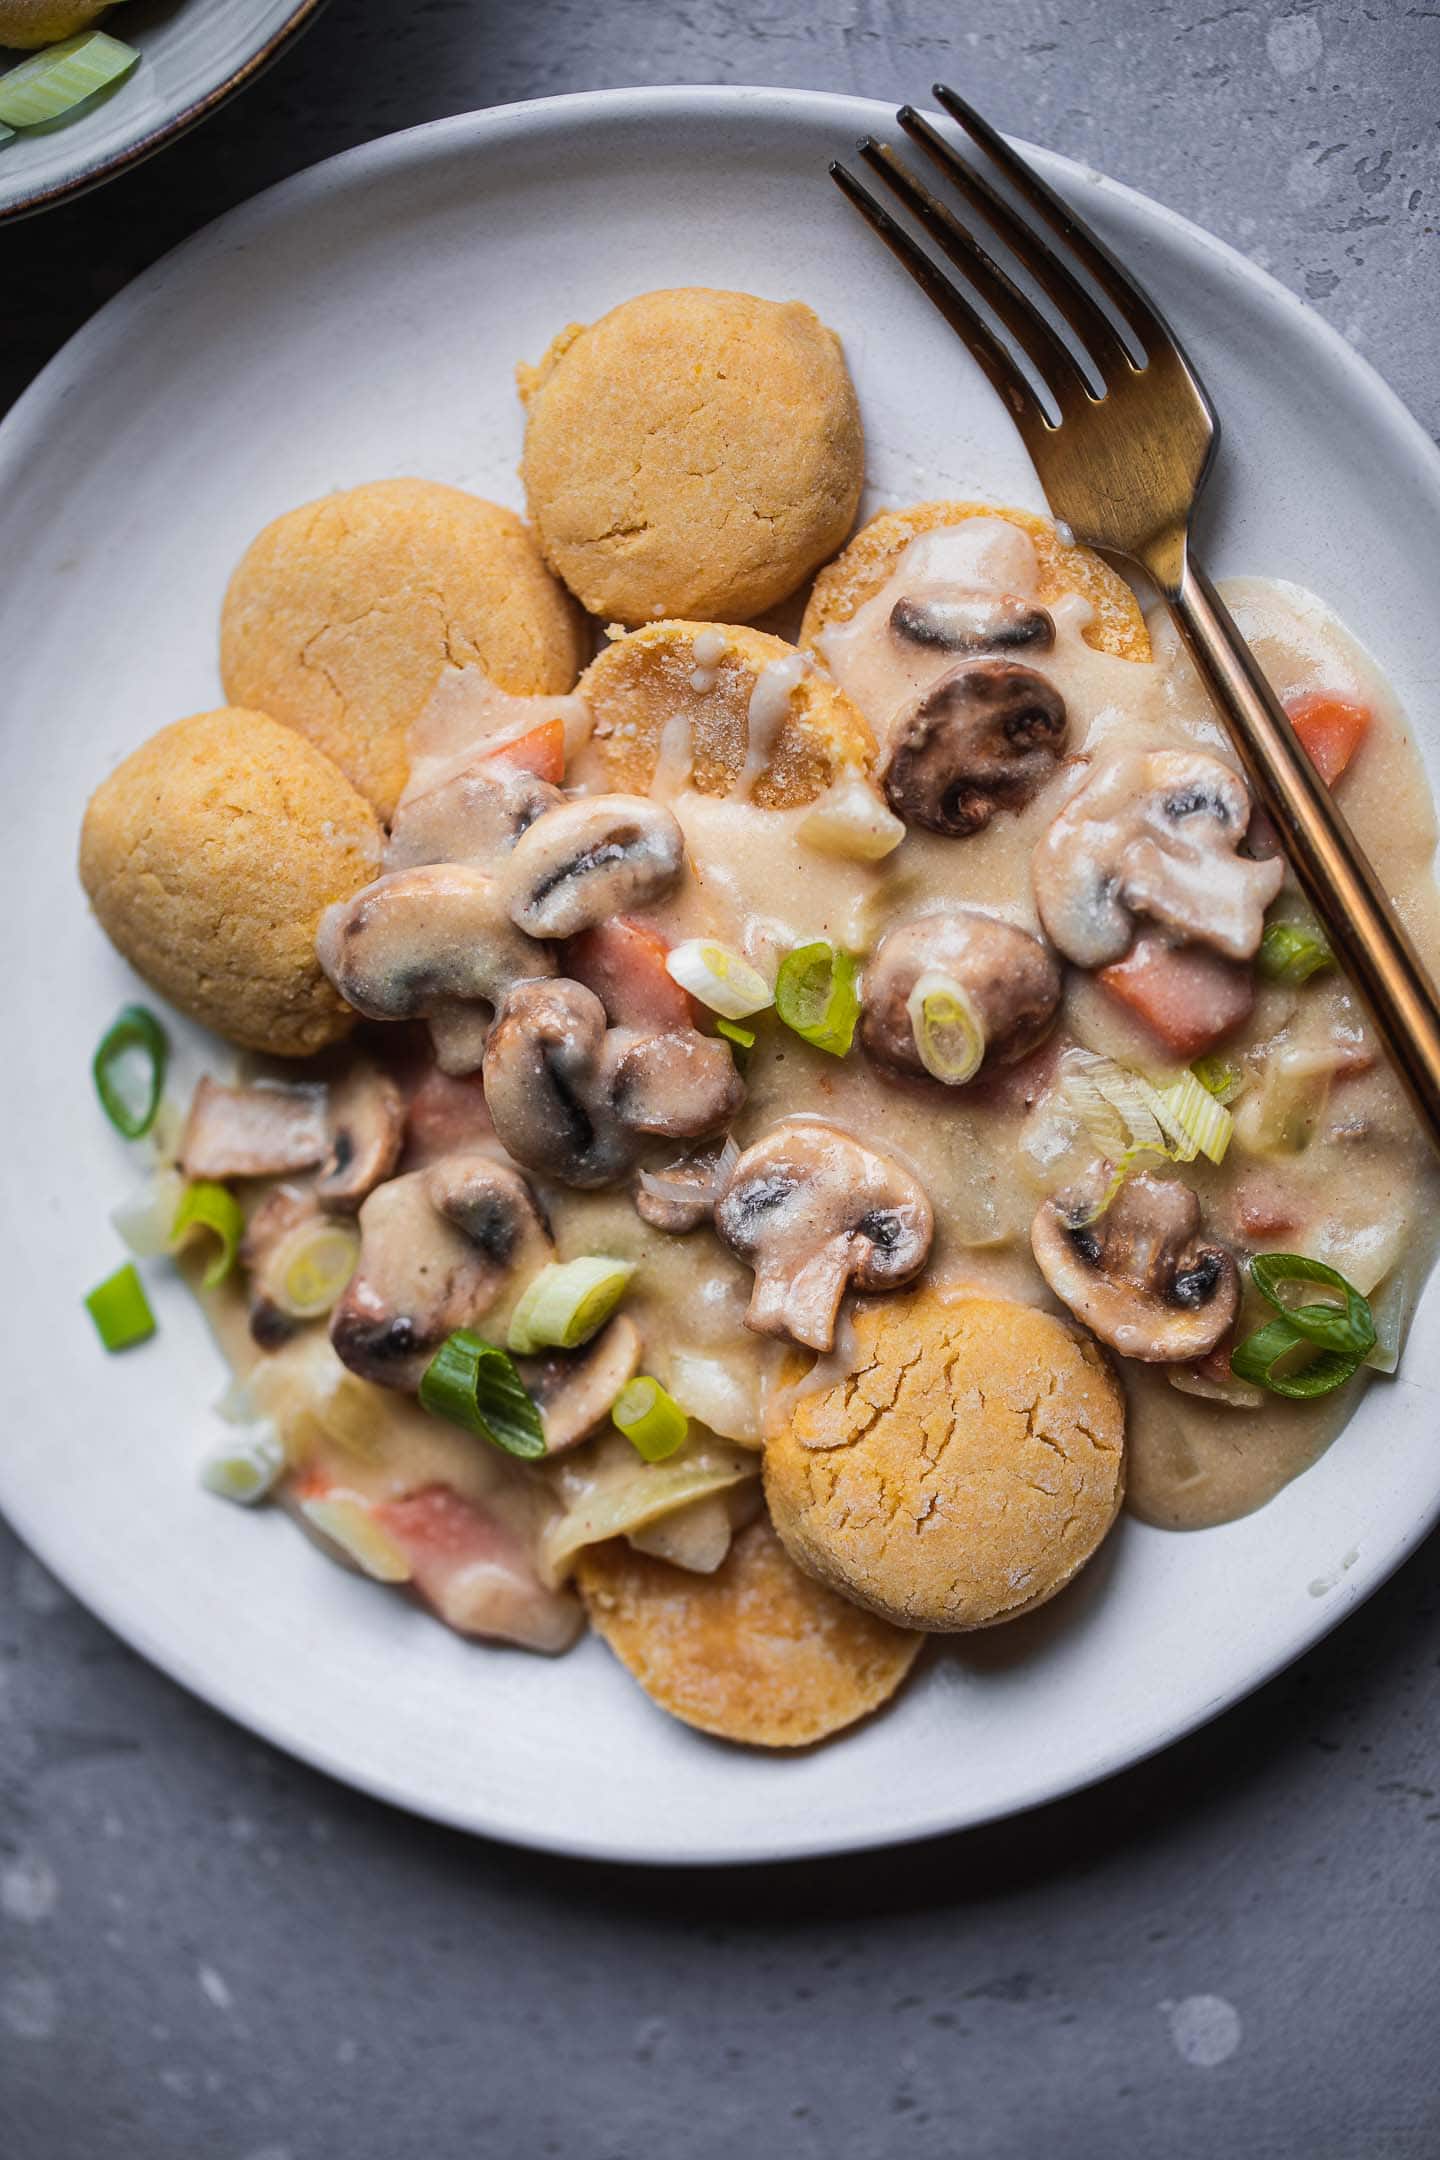 Plate of vegan biscuits with gravy